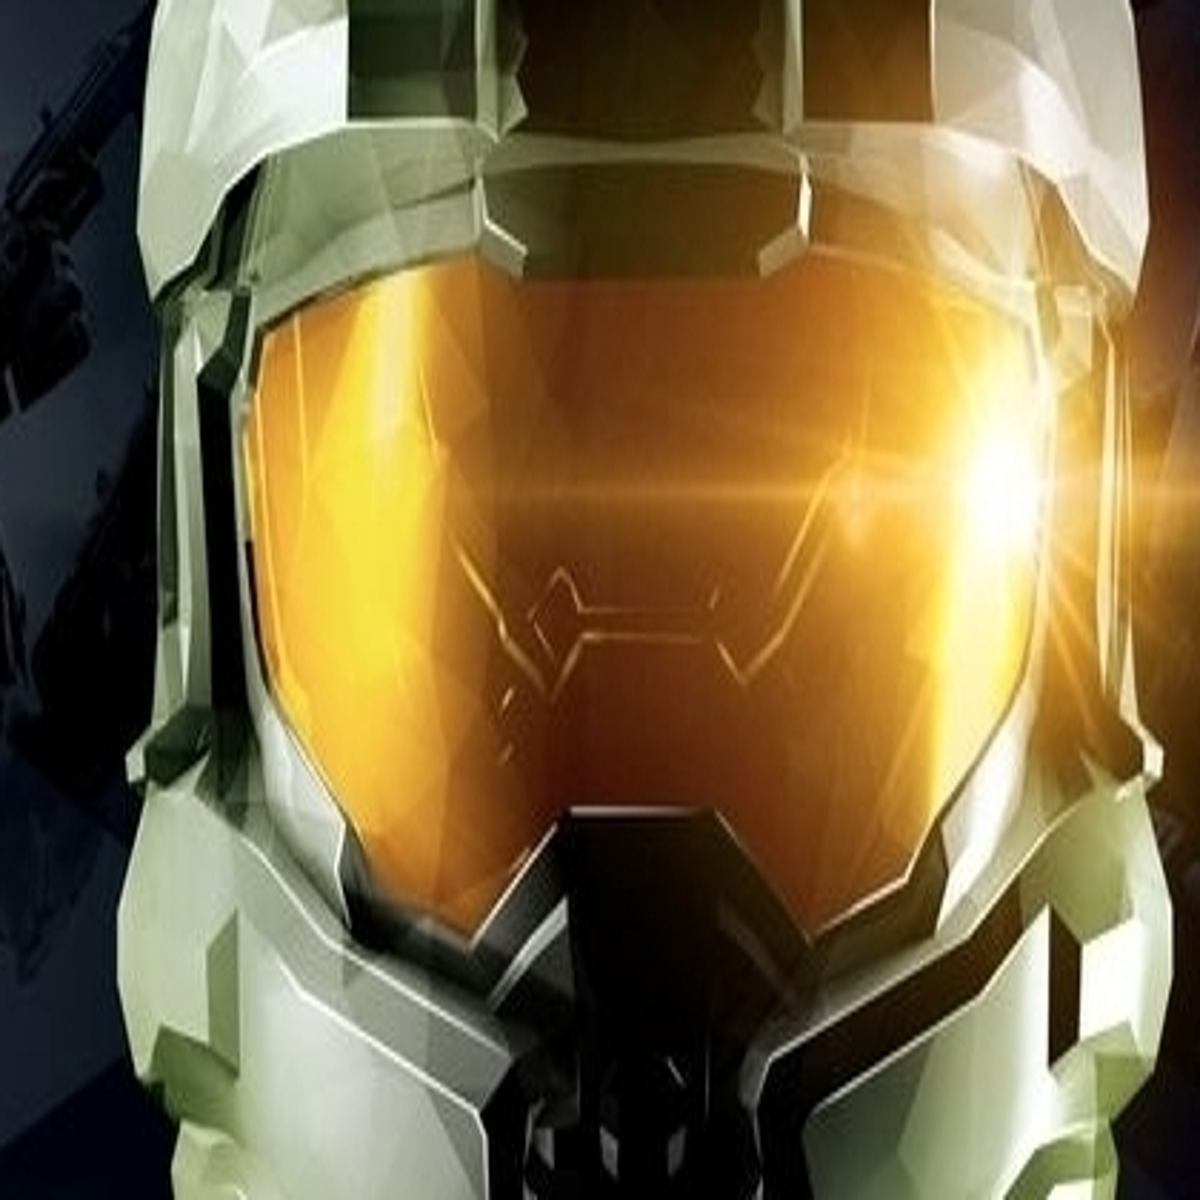 Xbox Series X, S will see optimized Halo: The Master Chief Collection - CNET